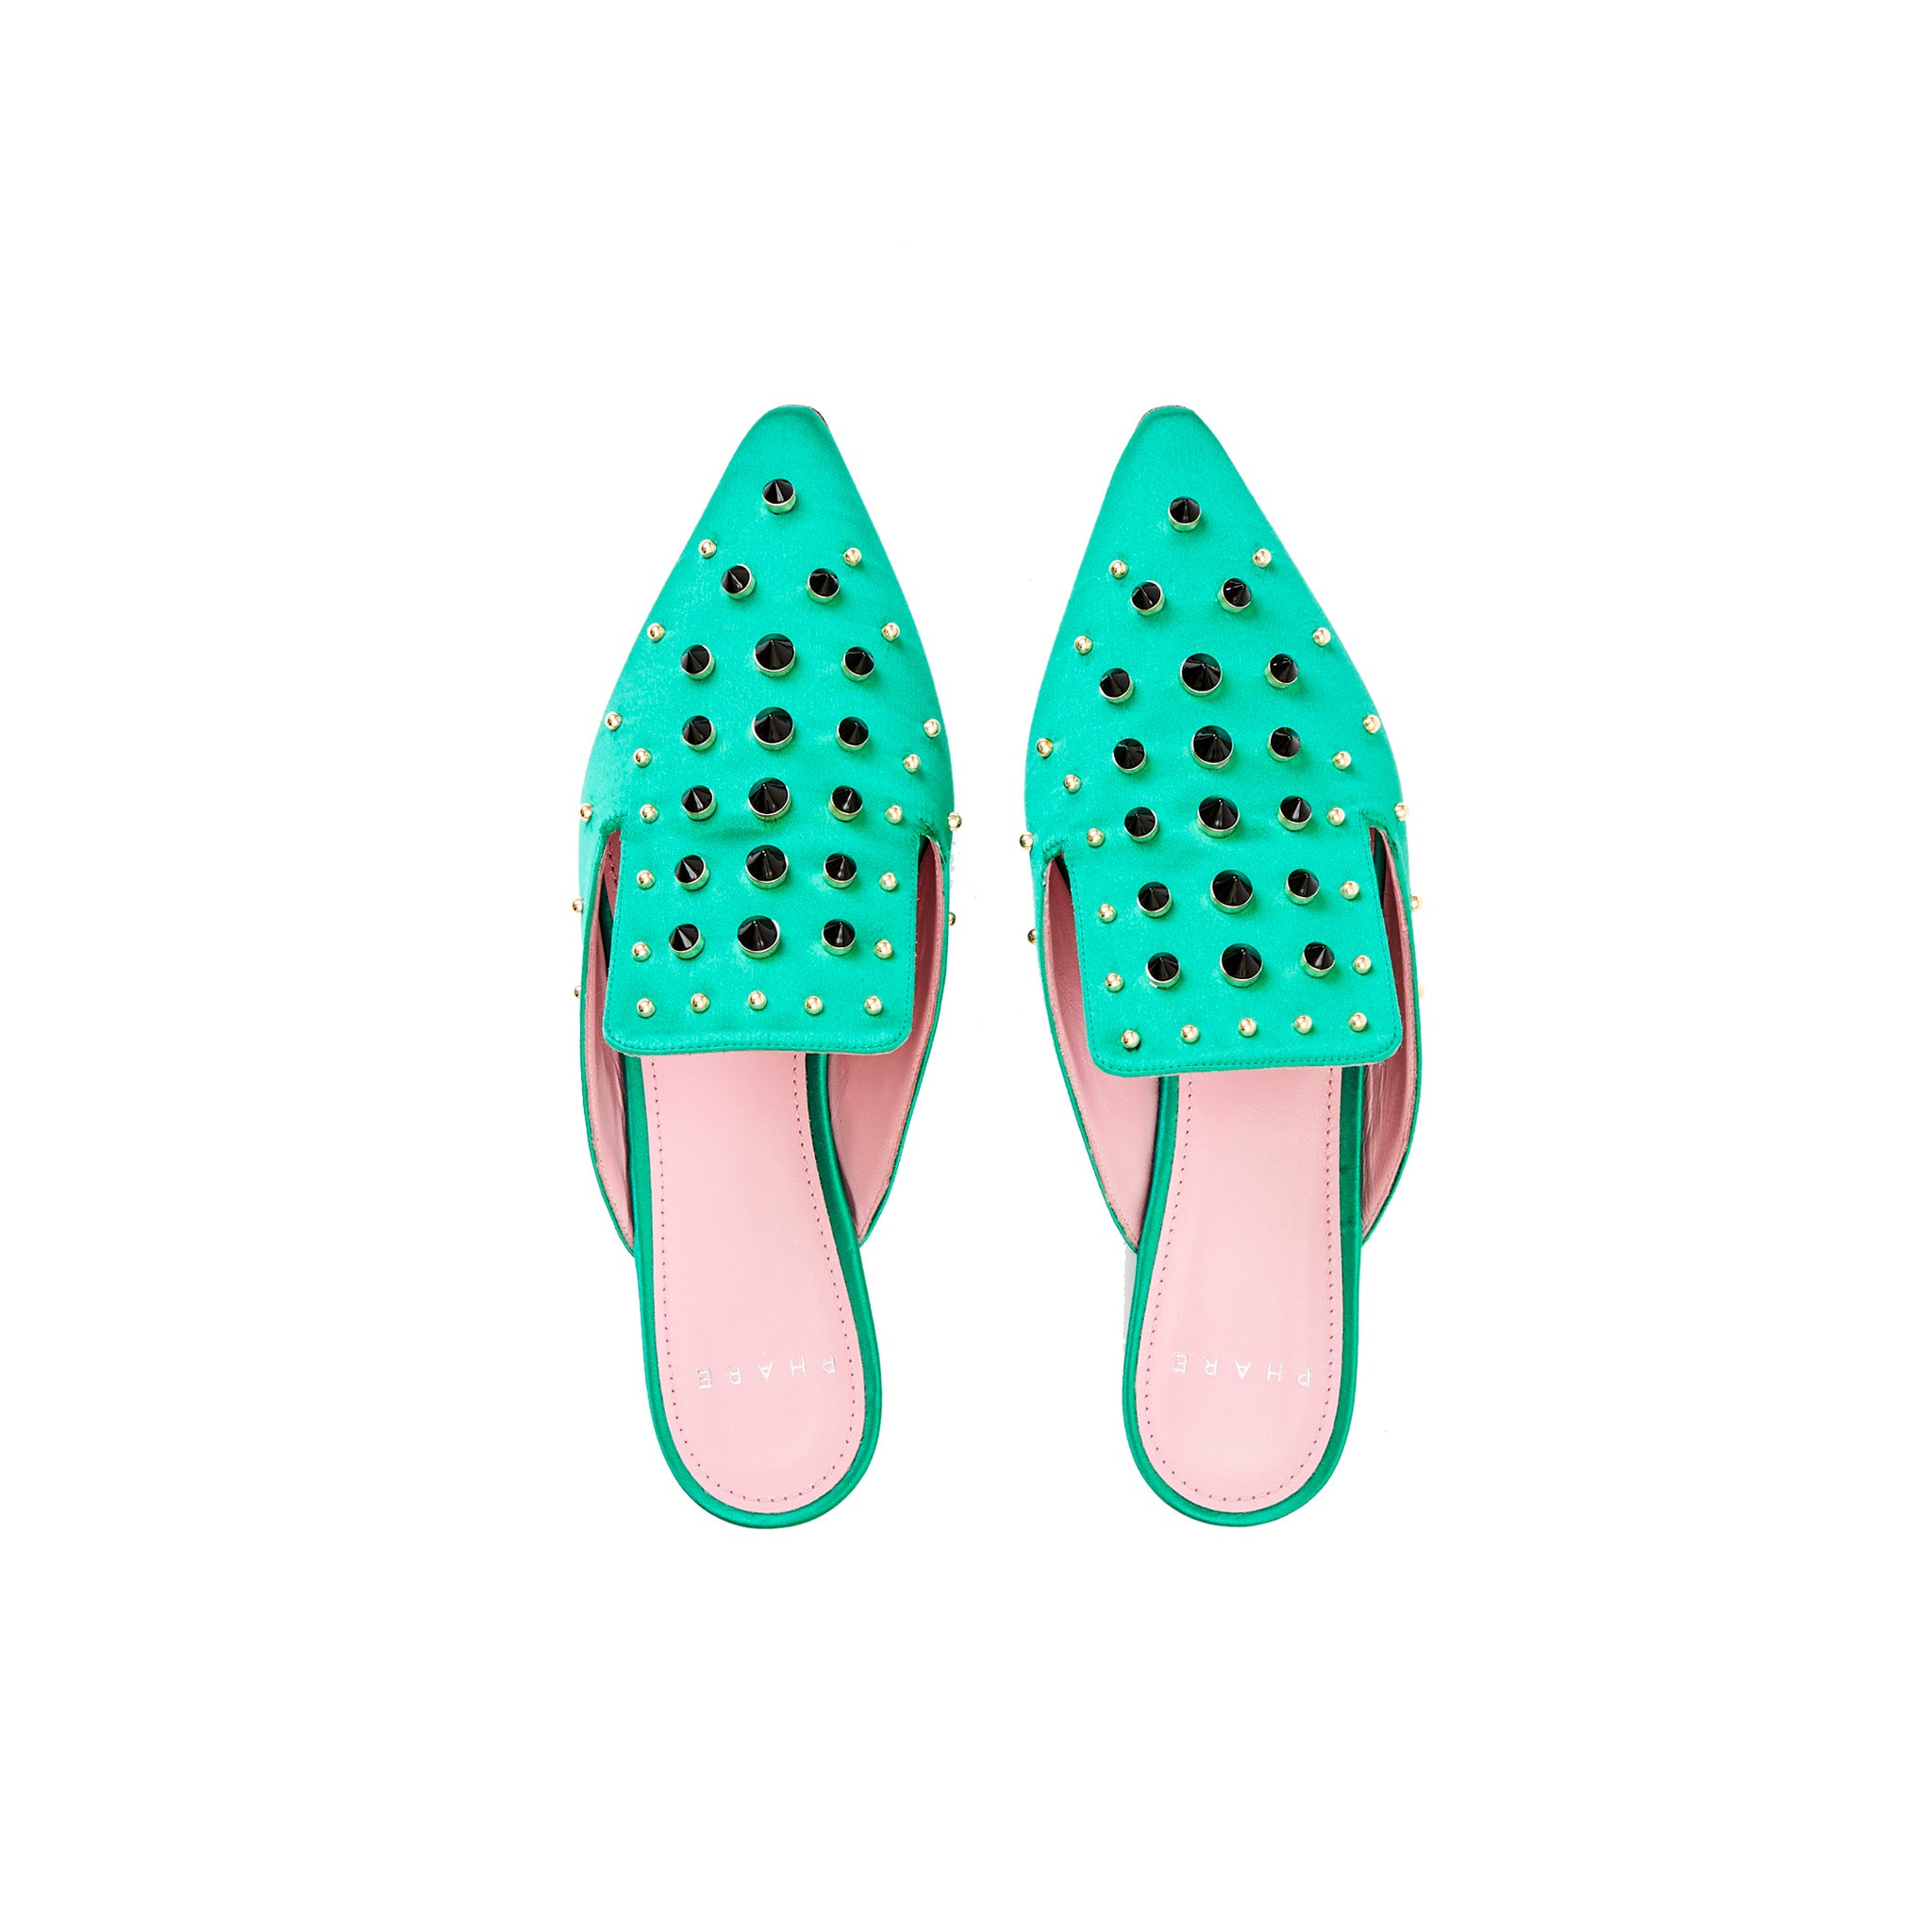 Phare Studded mule in verde silk satin with black and gold studs top view 